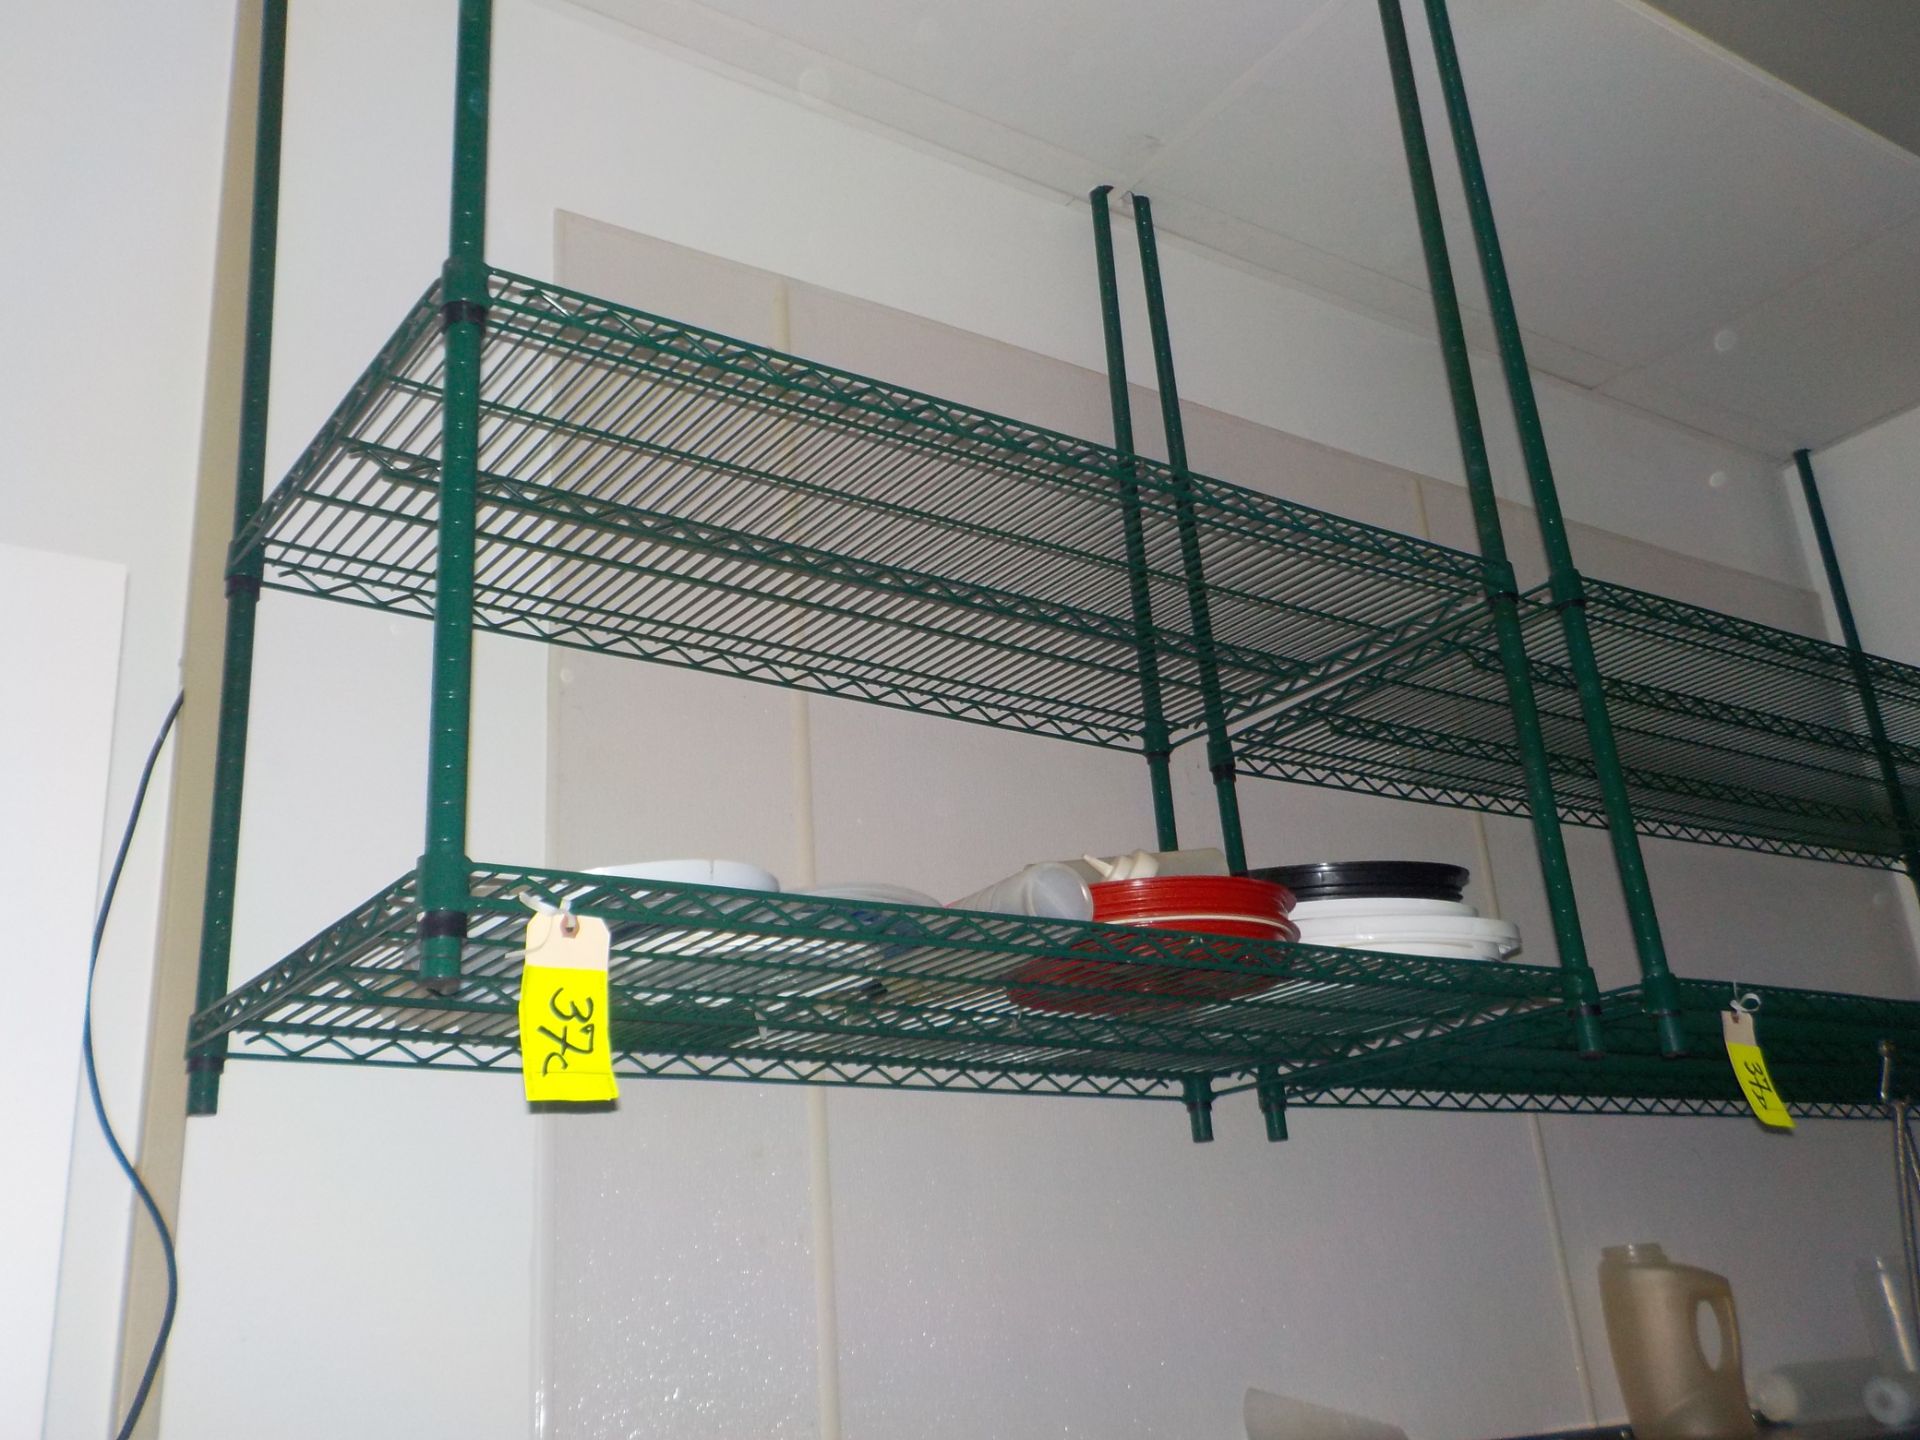 Shelving, Coated 4’ X 2’ 2 Tier, Ceiling Mount - Image 3 of 4